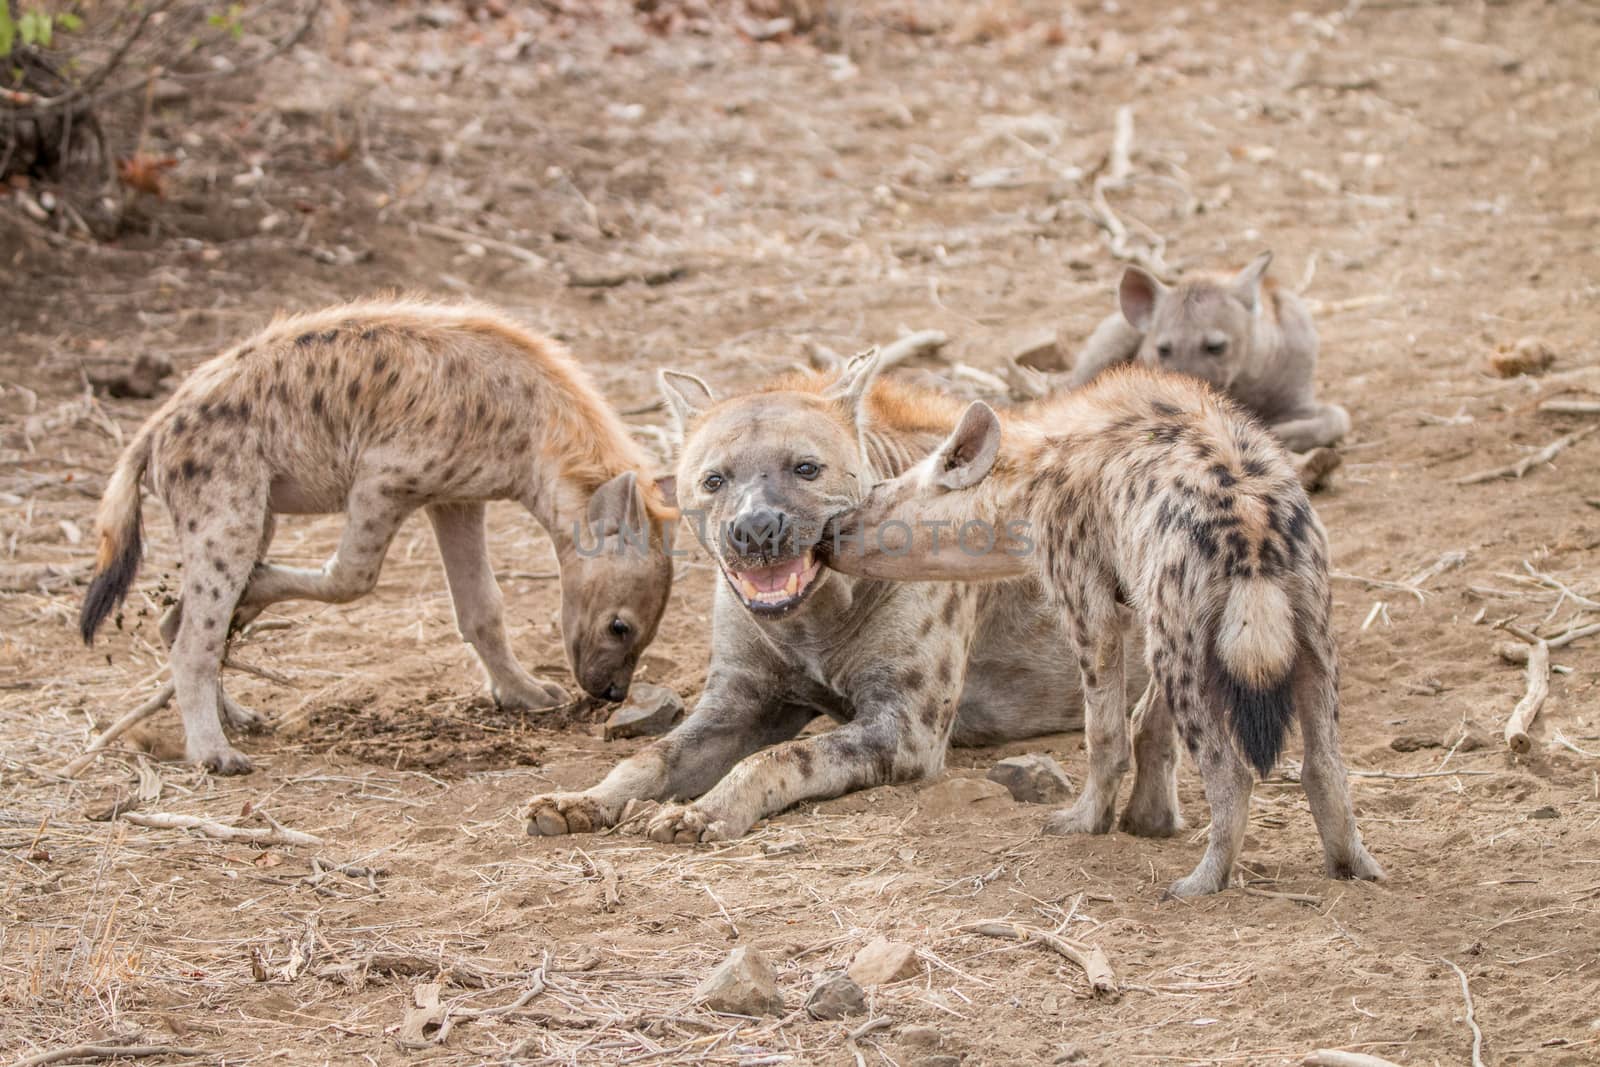 Spotted hyena cubs with mother Hyena in the Kruger National Park by Simoneemanphotography